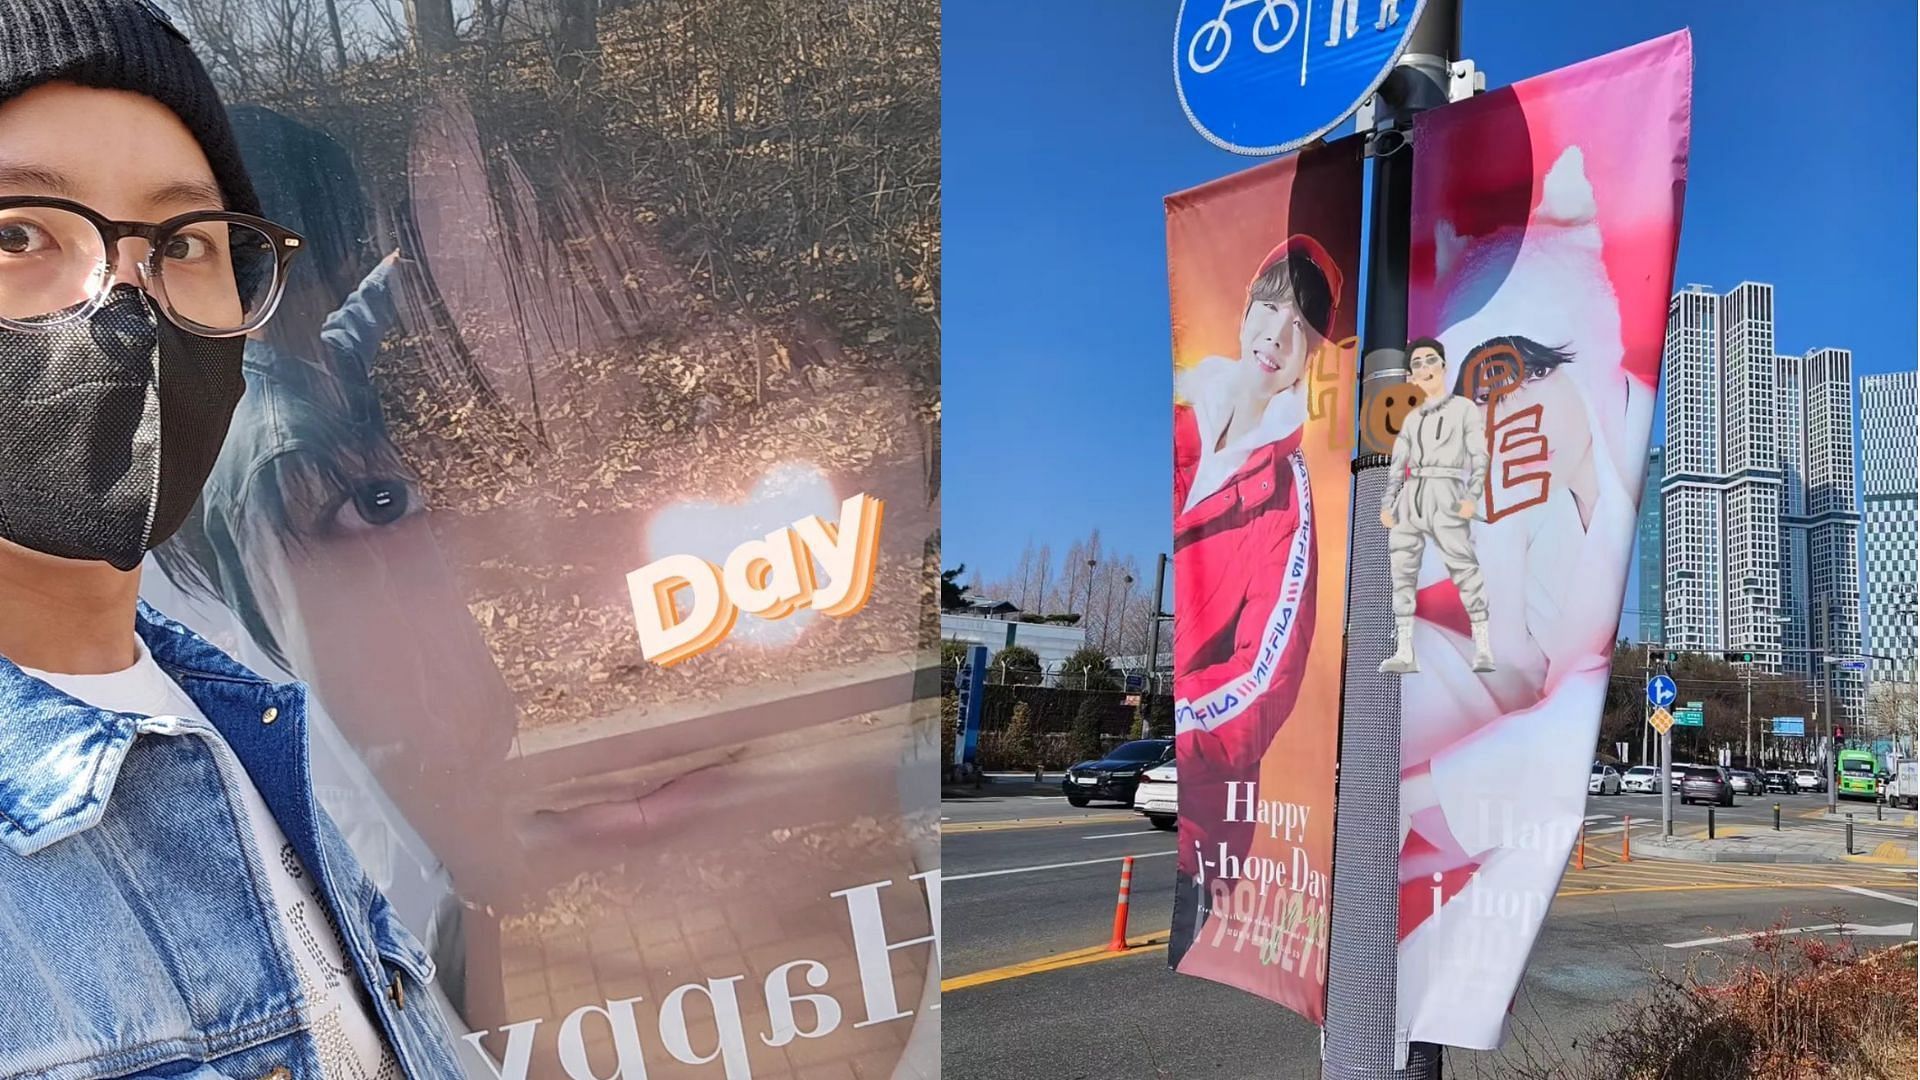 J-hope spots his birthday posters made by fans (Images via Instgaram/uarmyhope)